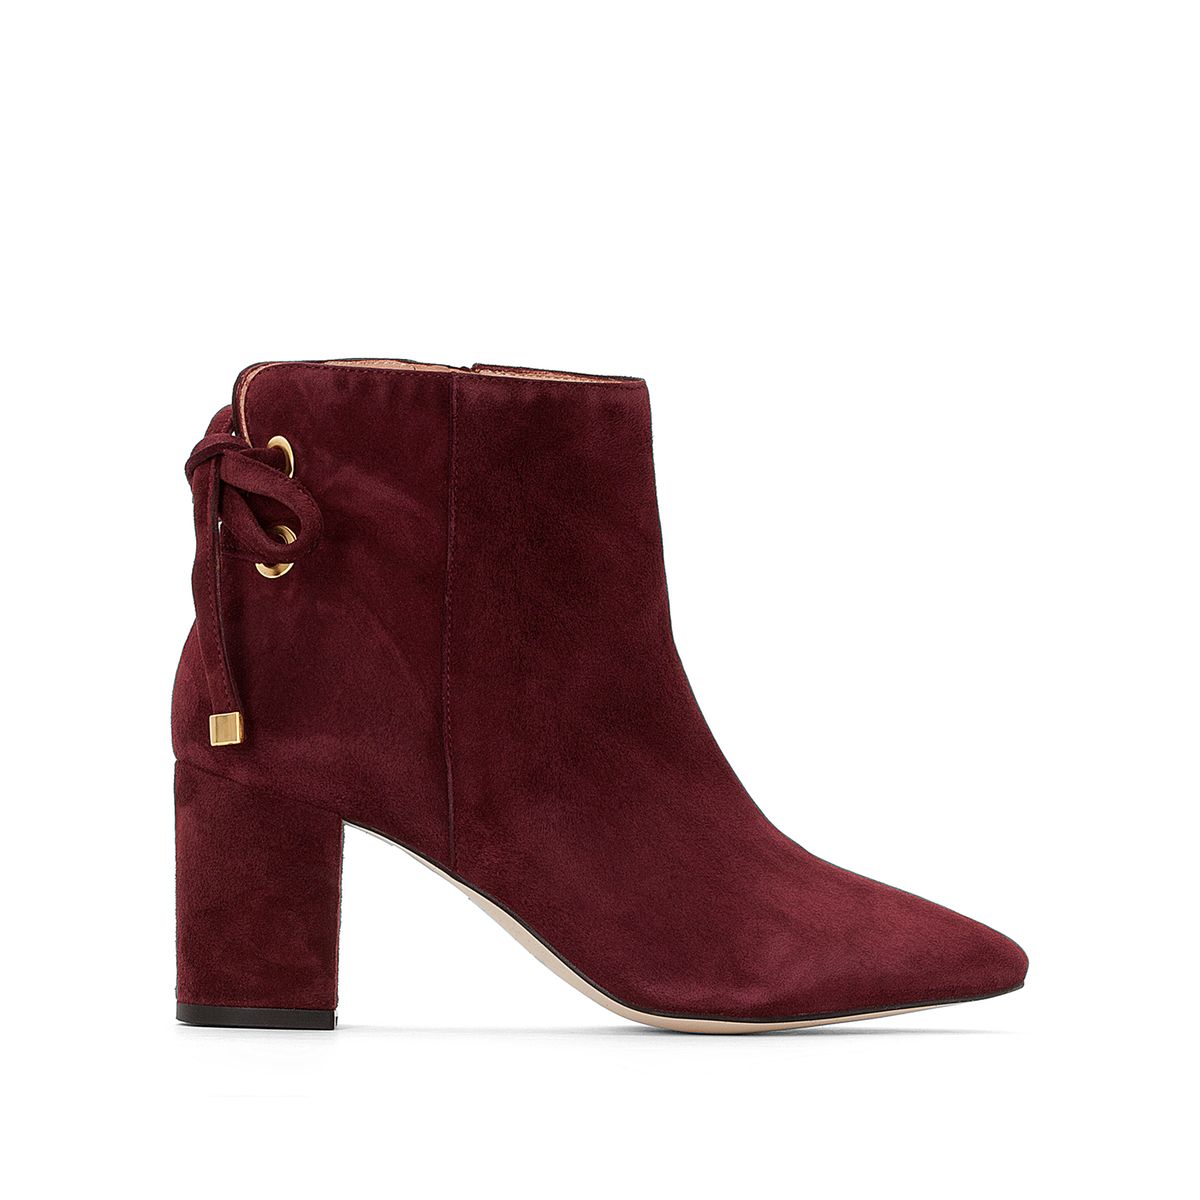 Boots cuir velours